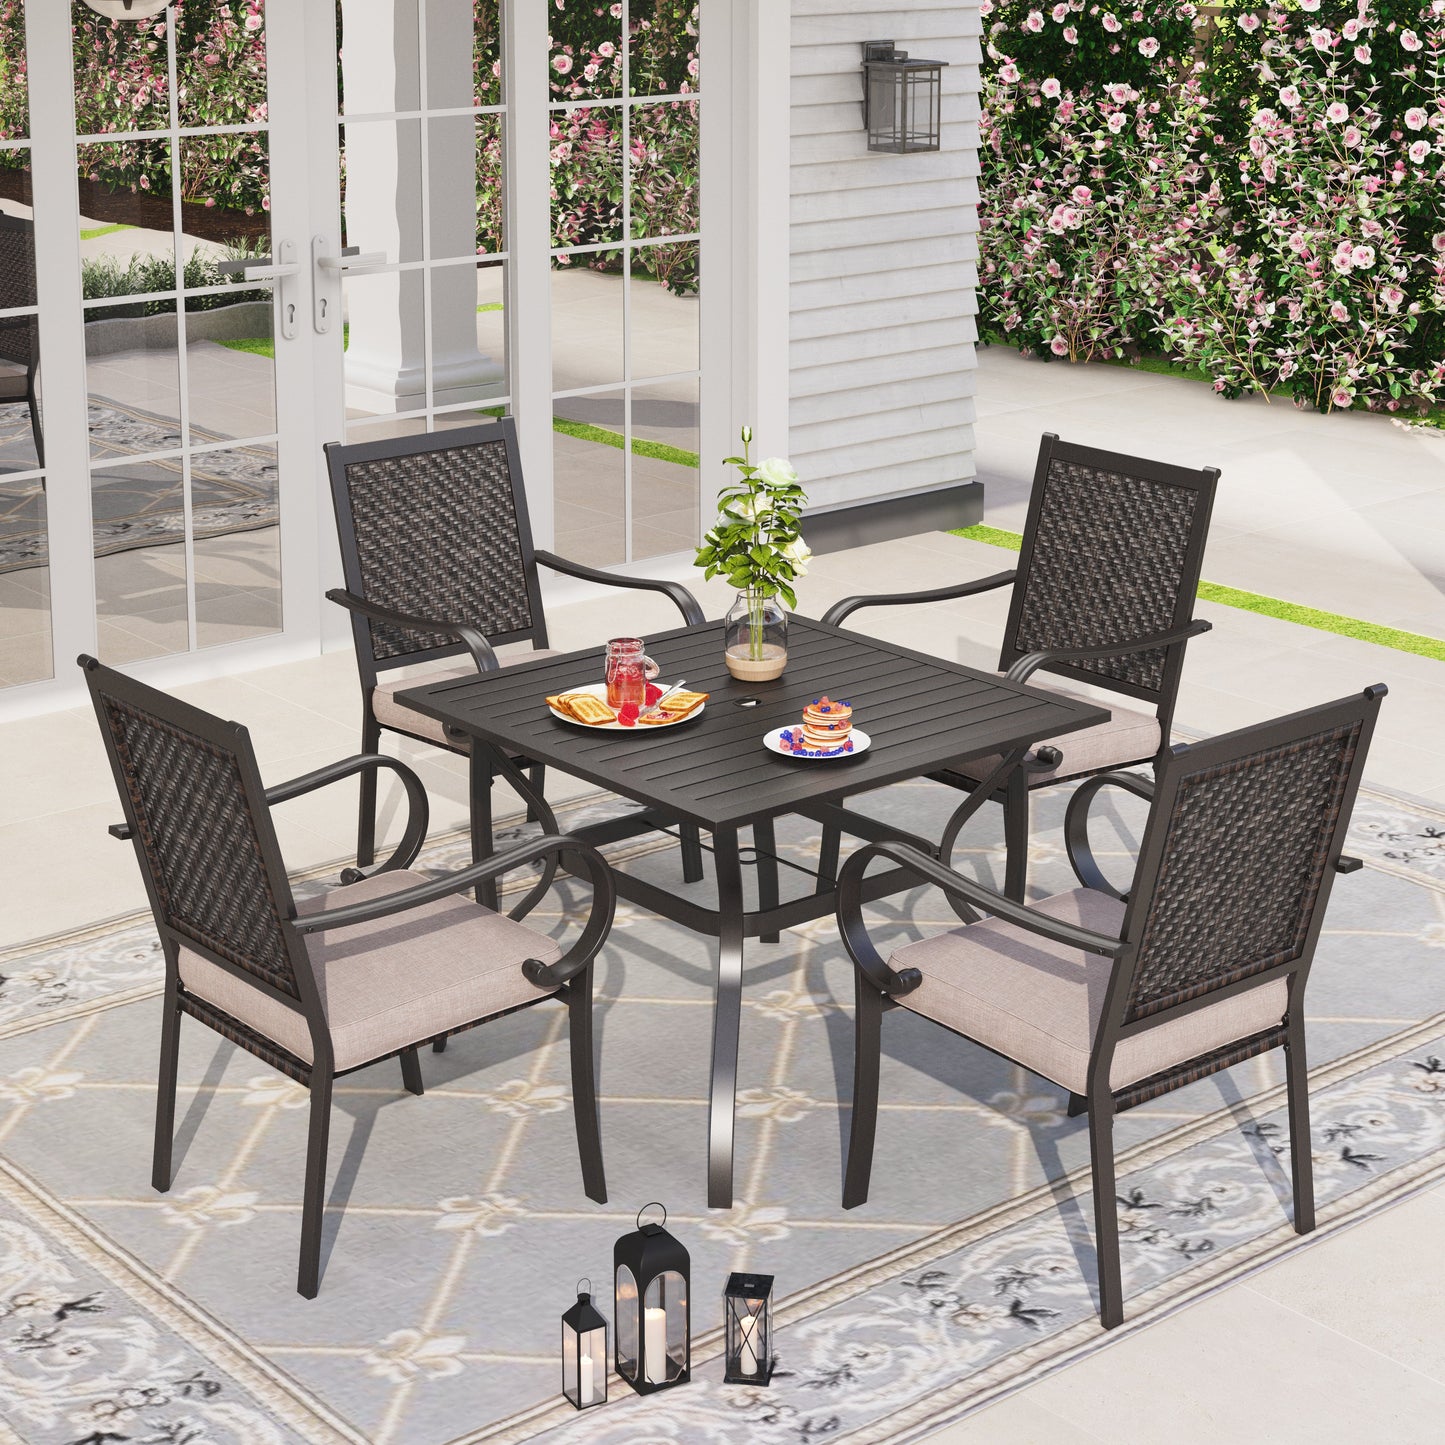 Sophia & William 5 Pieces Outdoor Patio Dining Set with 4 Rattan Cushioned Chairs & 1 Metal Square Table for 4 person